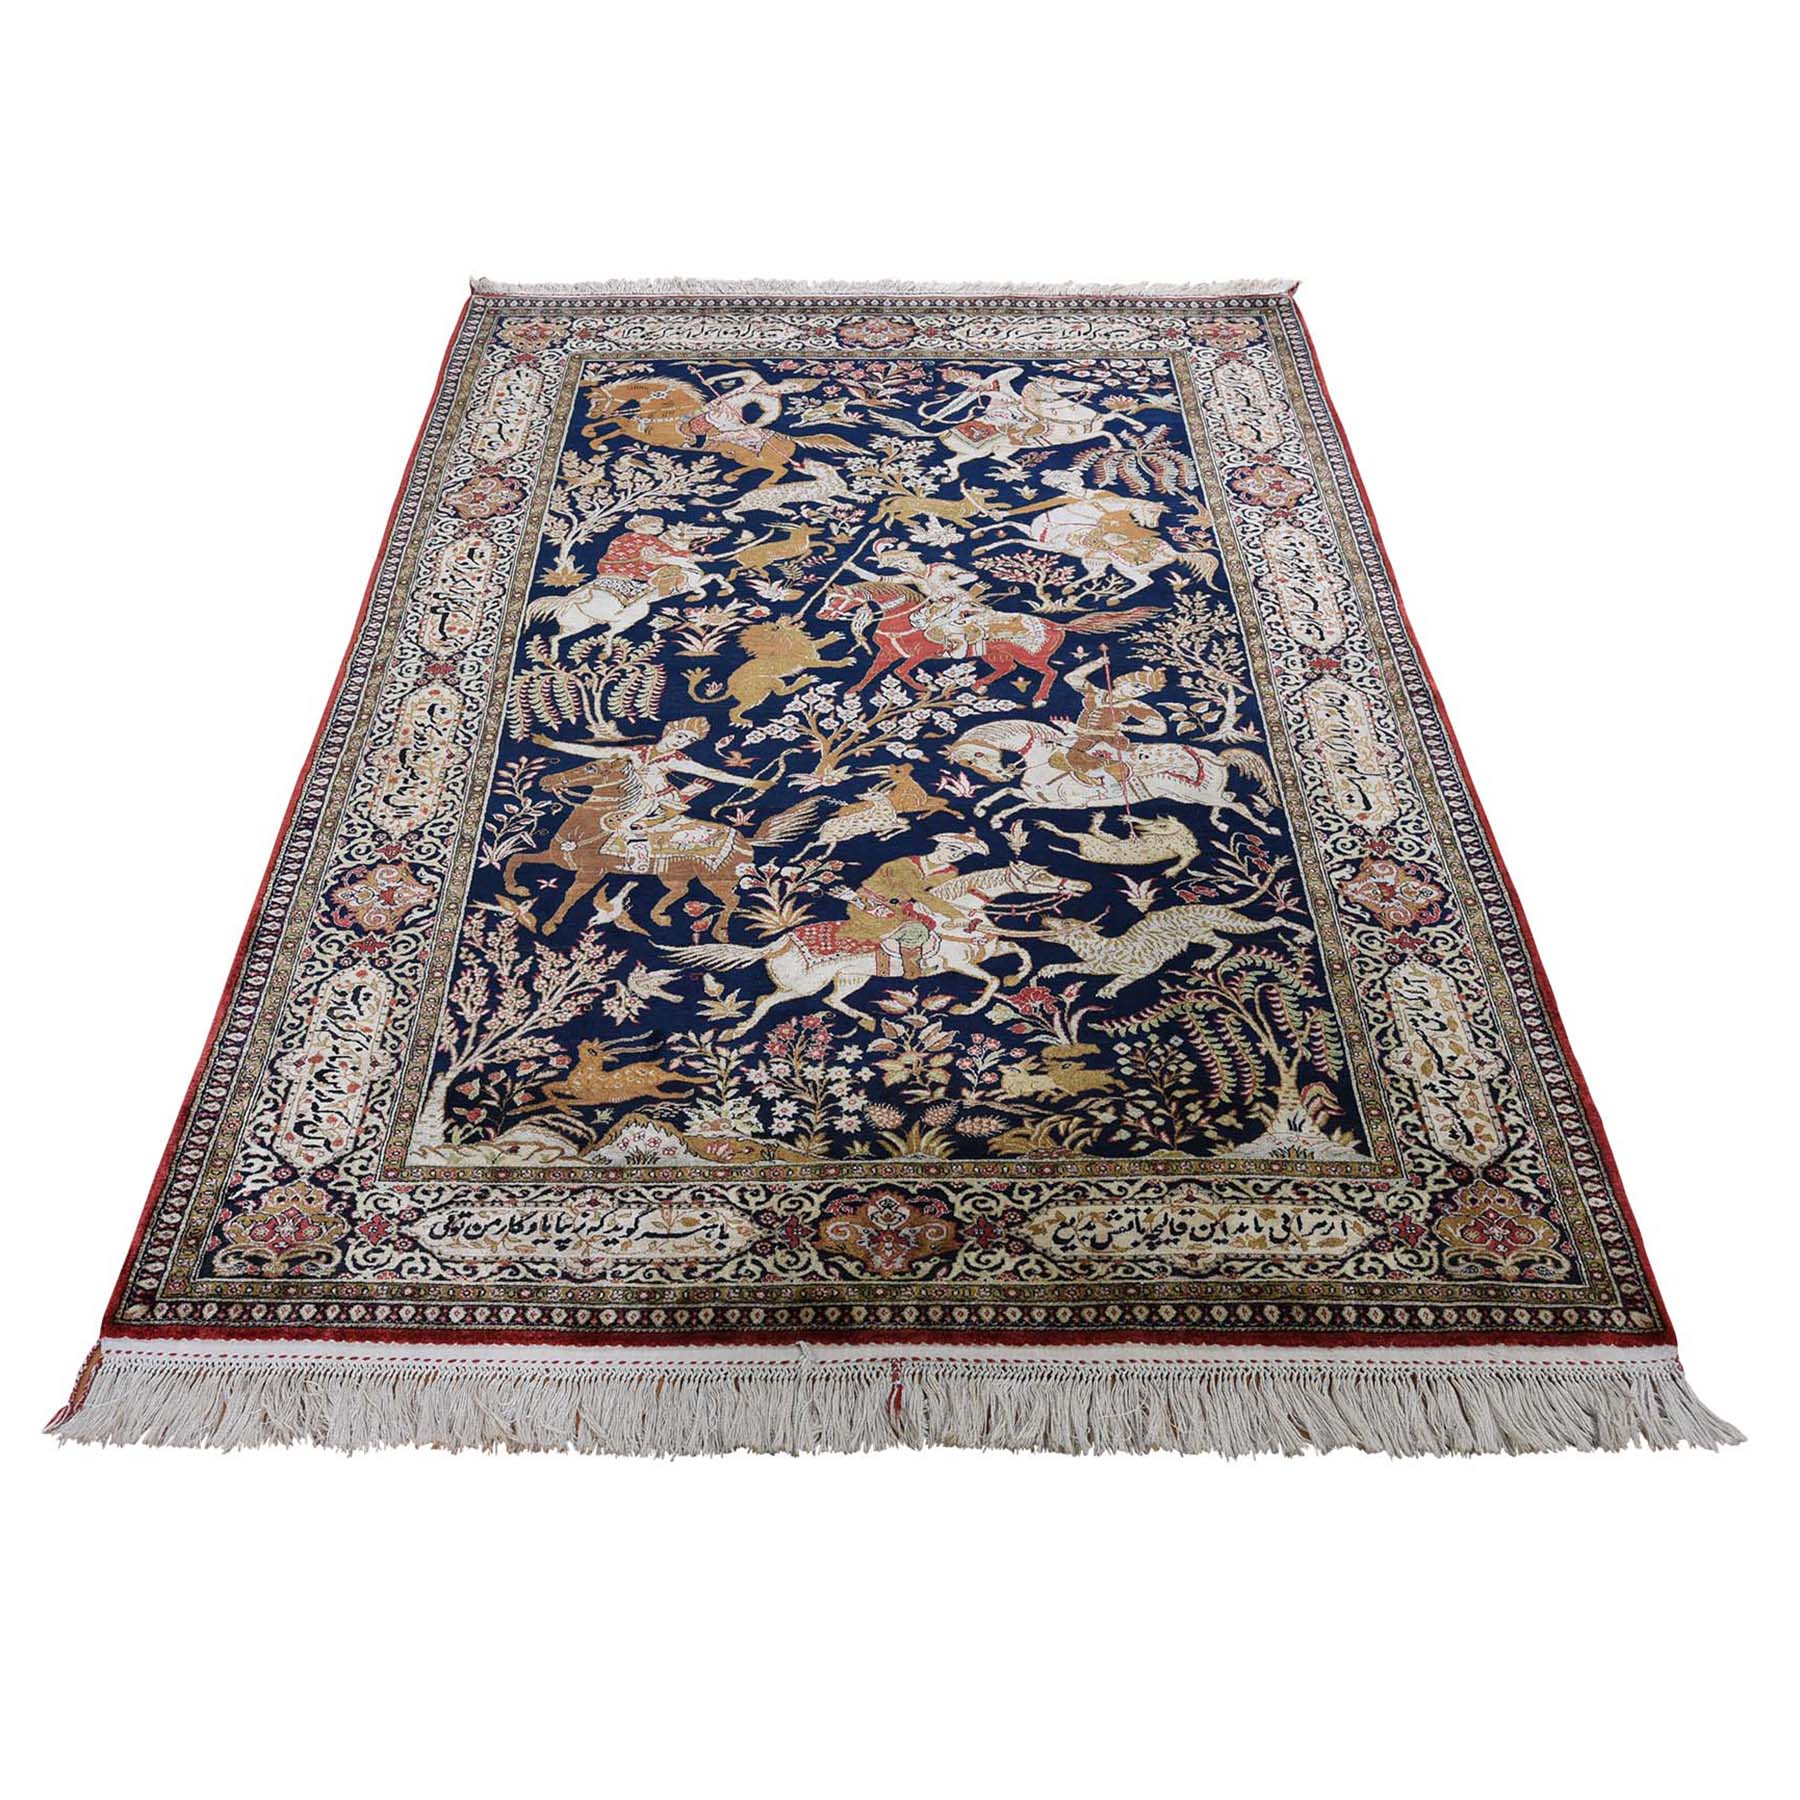 4'4"x6'8" Navy Blue Vintage Persian Silk Qum Hunting Design With Poetry Hand Woven Oriental Rug 